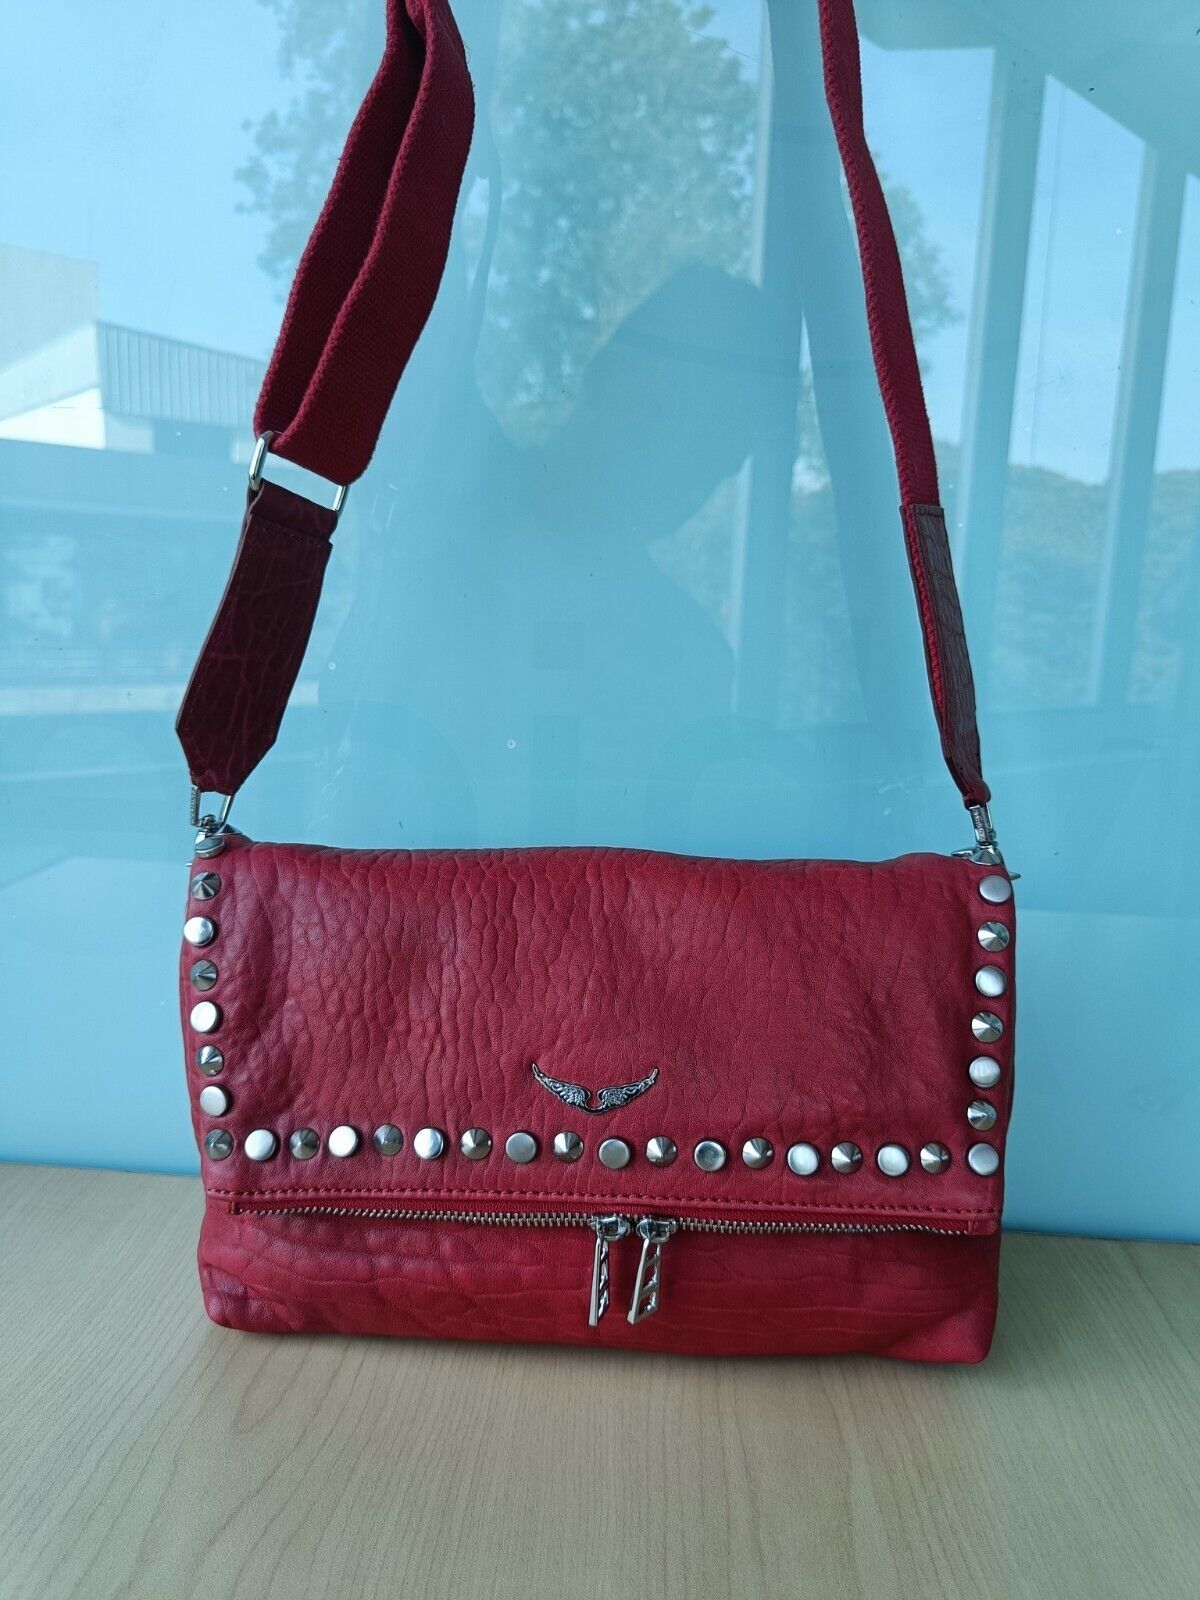 Primary image for Zadig & Voltaire Pebbled Leather Shoulder Bag $500 WORLDWIDE SHIPPING